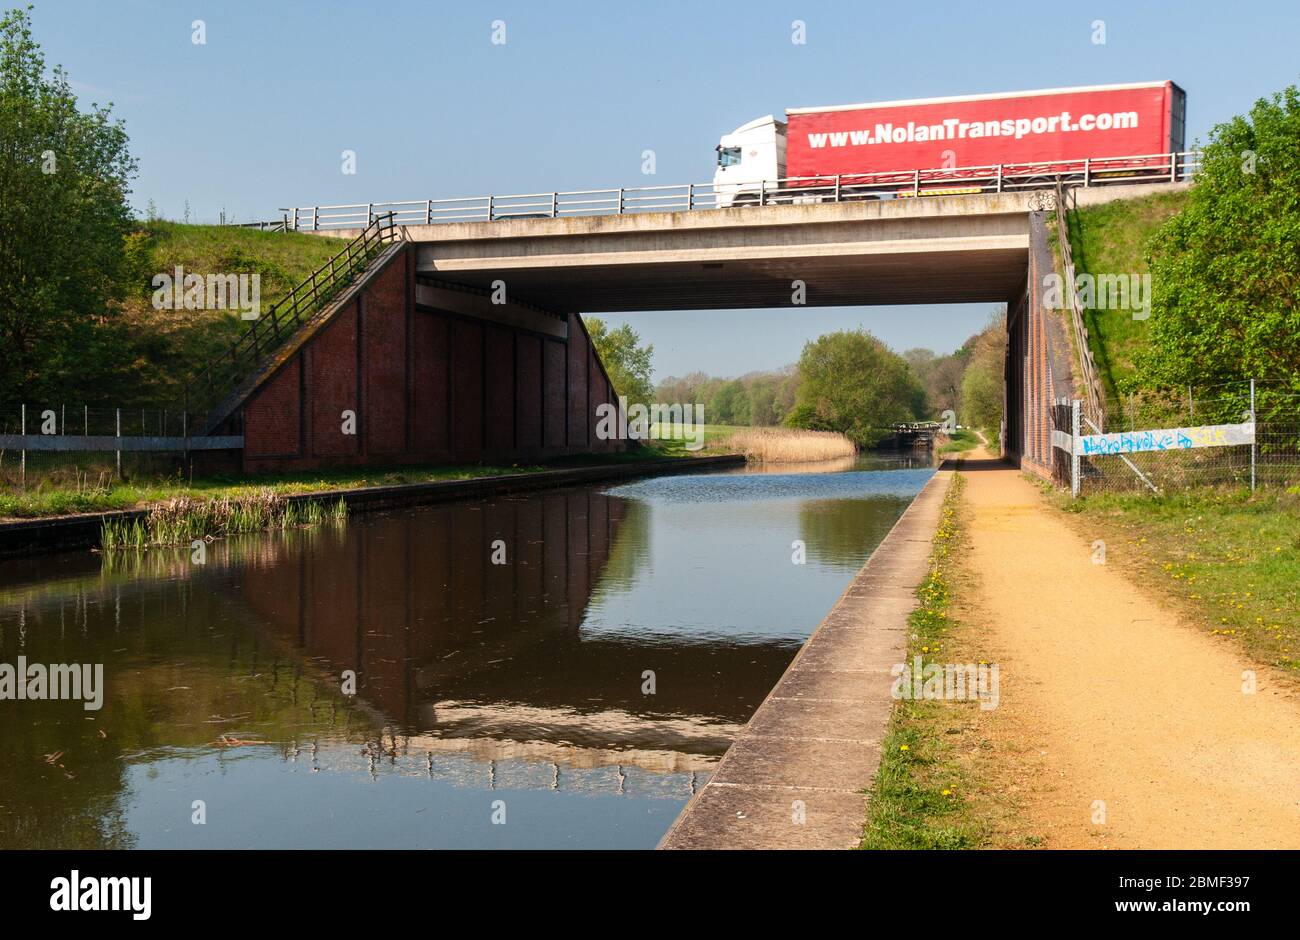 Newbury, England, UK - April 22, 2011: A lorry crosses the Kennet and Avon Canal at Higg's Lock on the A34 Newbury Bypass viaduct. Stock Photo